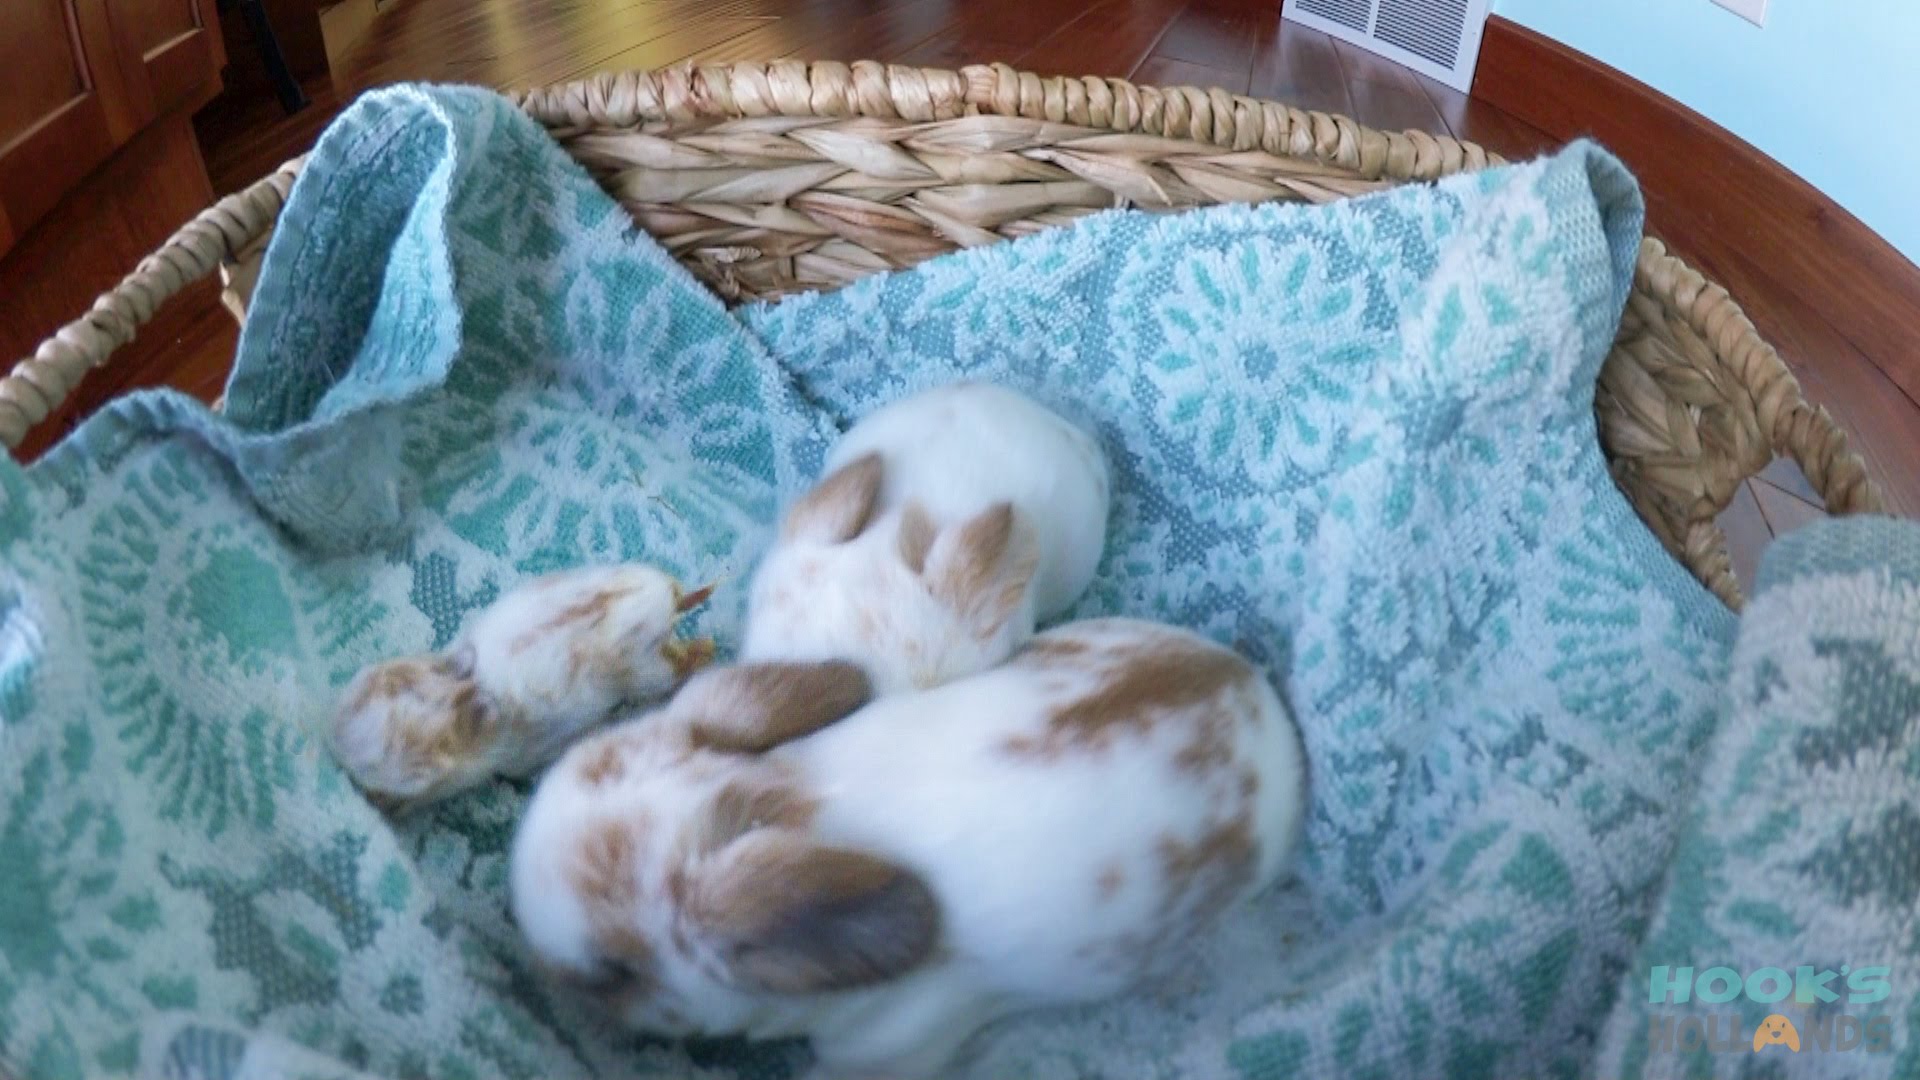 11-Day-Old Holland Lop Babies and a Tiny Peanut Bunny